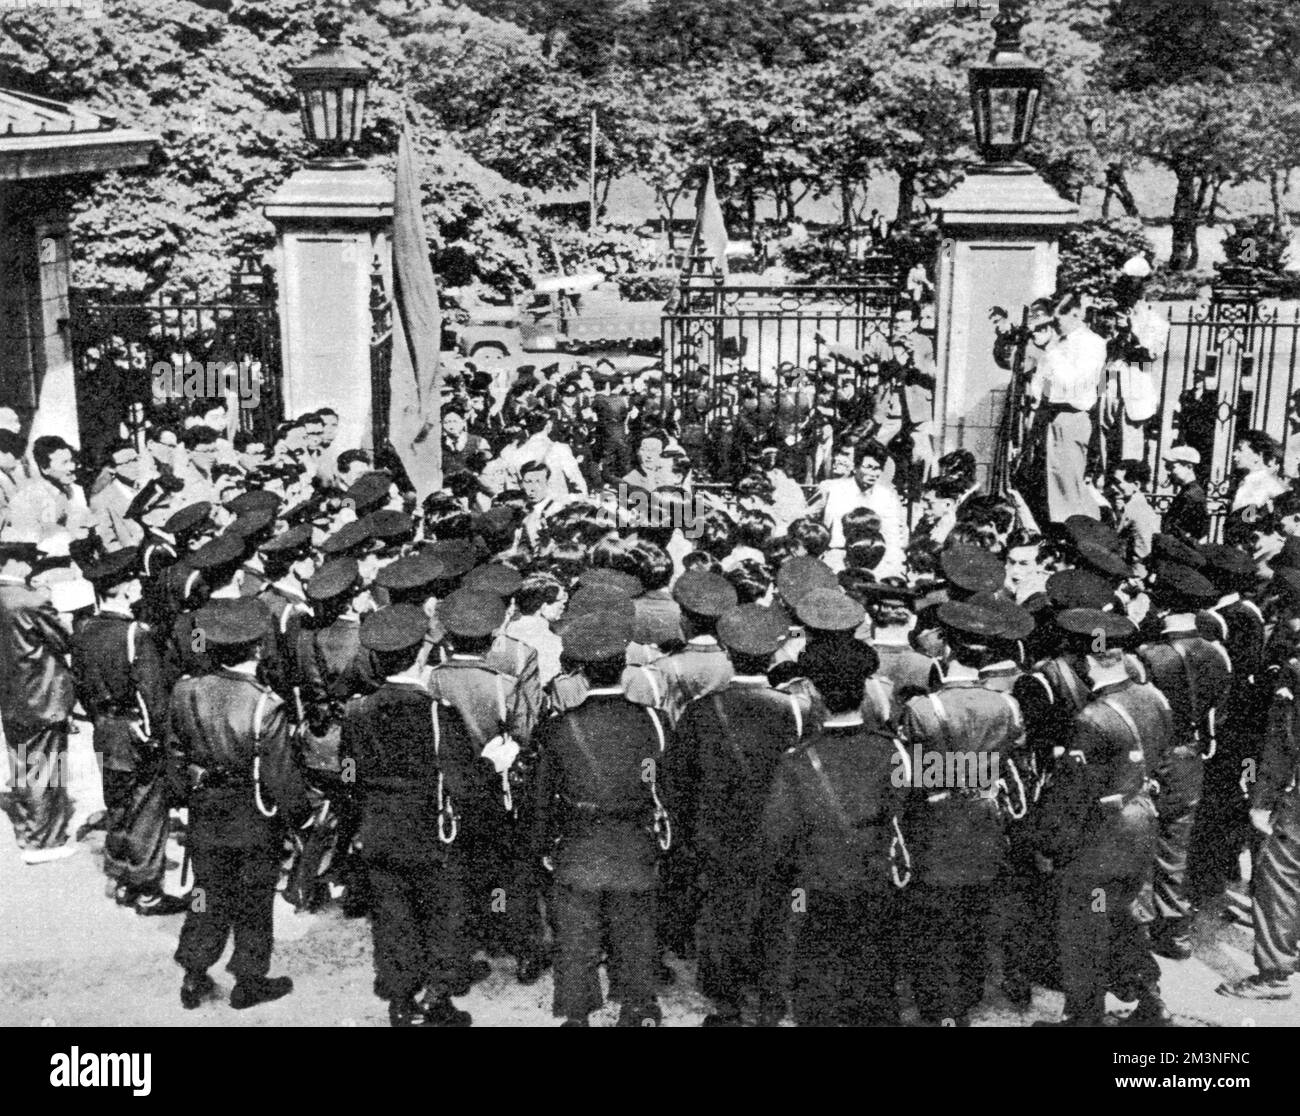 Tokyo, Japan: a small group of Japanese students, entirely surrounded by police, demonstrating against the British nuclear tests. On May 16th 1957 a group of members  of the Tokyo Students' Union demostrated outside the gates of the British Embassy, carrying placards saying 'Down with Macmillan' and 'We protest British H-Bomb'. A smaller group staged a 'sit down' protest in the embassy grounds.      Date: 16th May 1957 Stock Photo